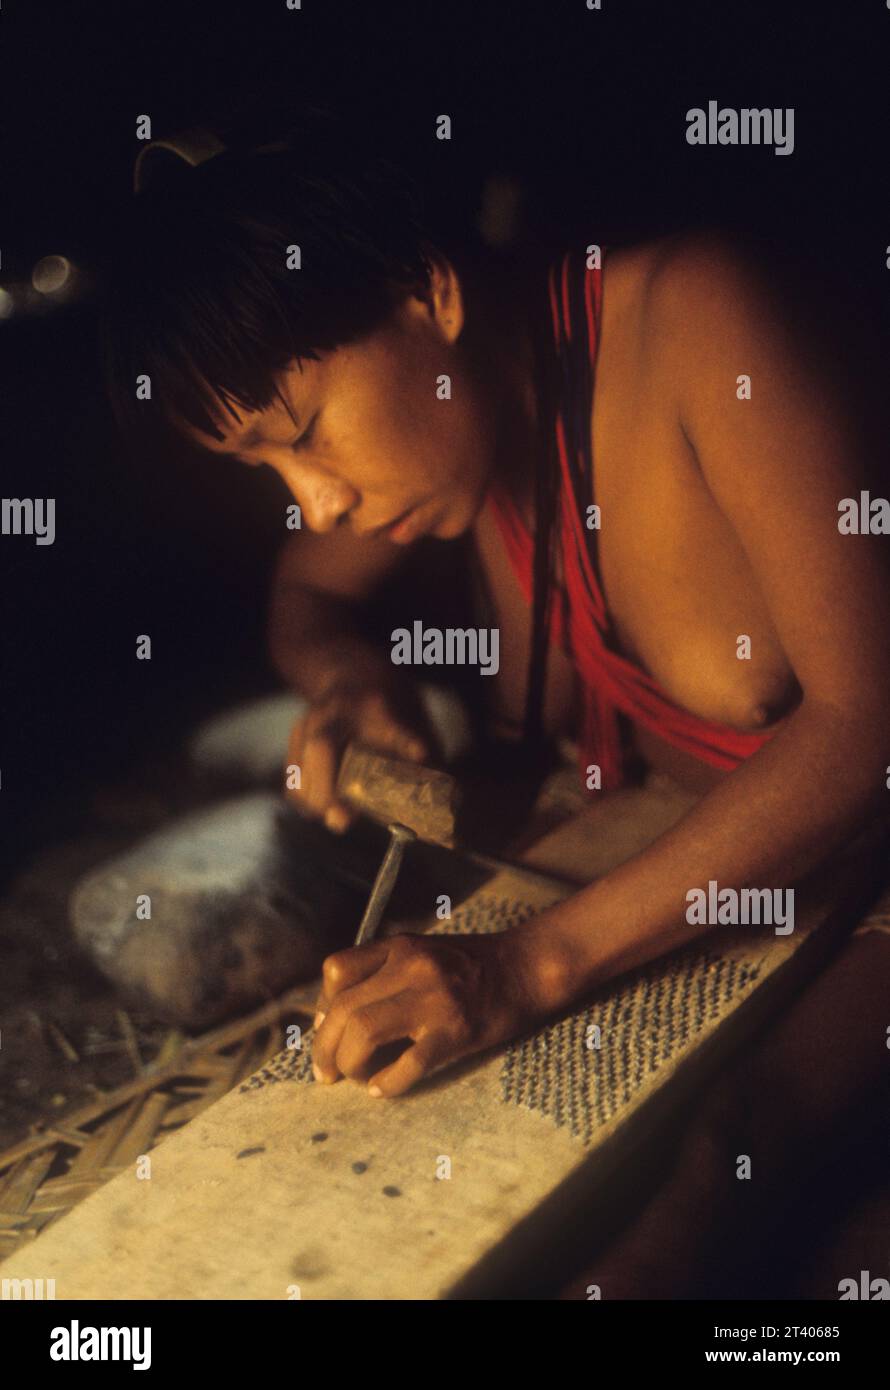 Piaroa (endonym: Wothiha, Wo’tiheh, Wotuha) indigenous woman inserting small stones on board to make manioc (cassava) grater. Guiana Highlands, Venezuela, South America. The Wothiha are one of the largest ethnic groups of Venezuela, numbering about 14,000. They speak a Salivan language. Part of their territory has been invaded by illegal miners and Colombian guerillas. This picture shows a craft no longer practiced by the Wothiha, as, according to anthropologist Stanford Zent who studied them 15 years later they now use mechanized manioc graters Stock Photo